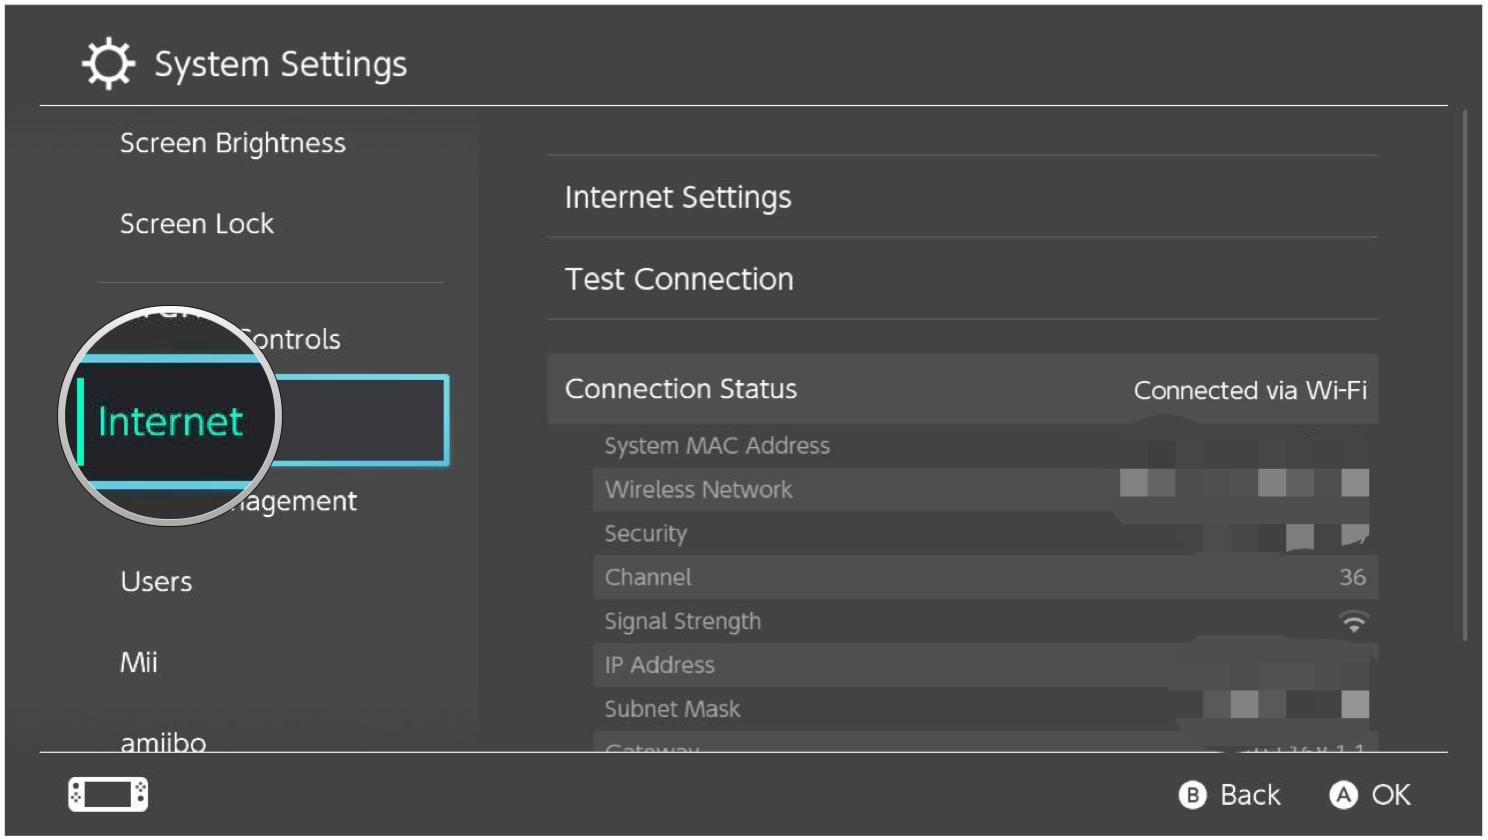 How to connect to a hotspot on your Nintendo Switch by showing steps: Select Internet in the side menu of System Settings